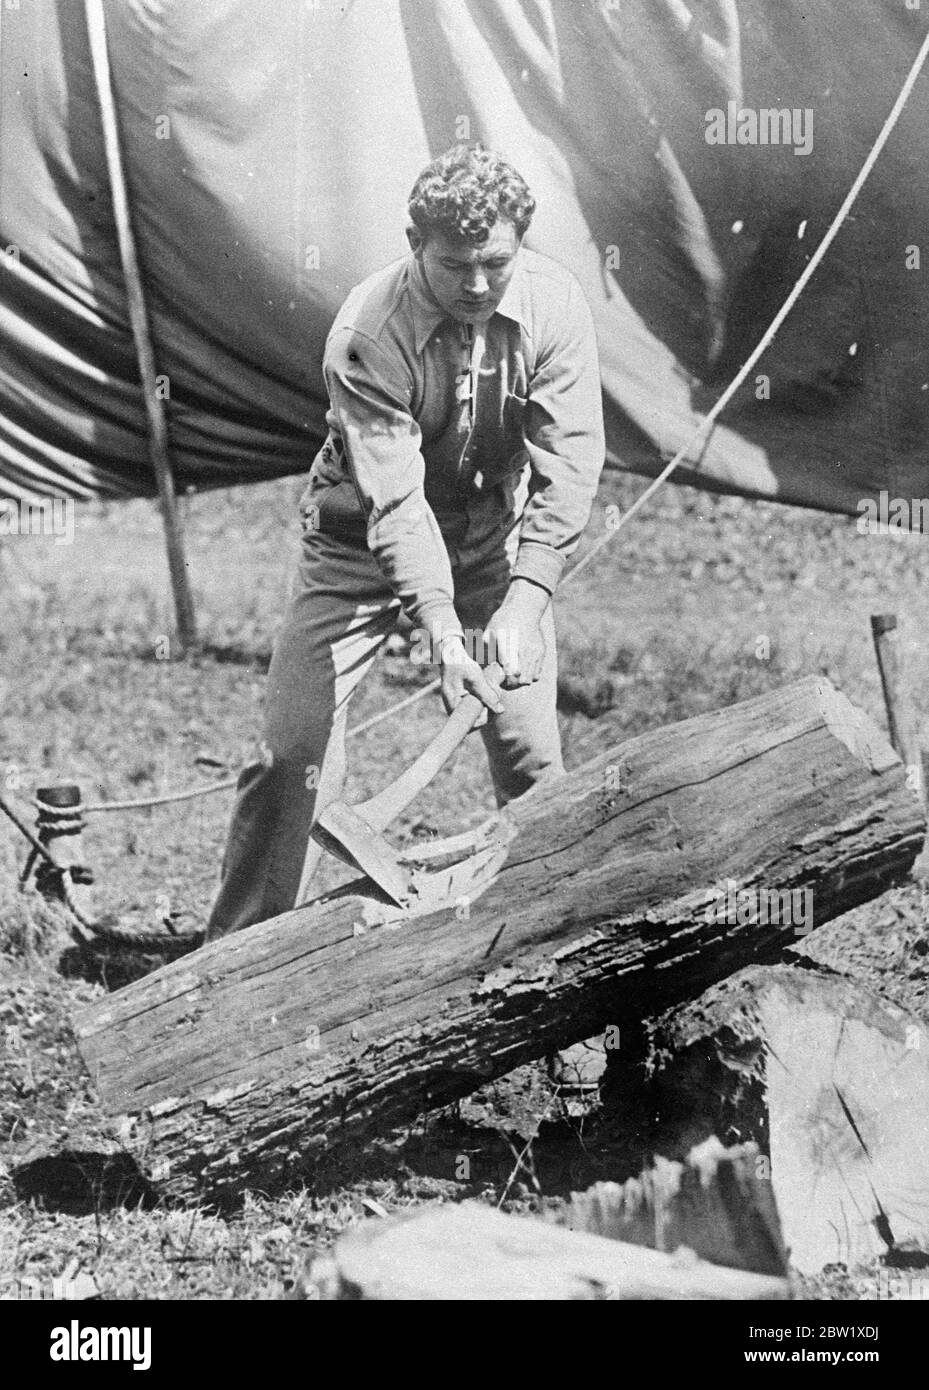 World's champion trains to defend title. James J. Braddock, world's heavyweight boxing champion, is training at Grand Beach, Michigan, to defend his title against Joe Lewis in Chicago next month. Photo shows: James J. Braddock chopping wood as part of his training at his Michigan camp. 26 May 1937 [?] Stock Photo